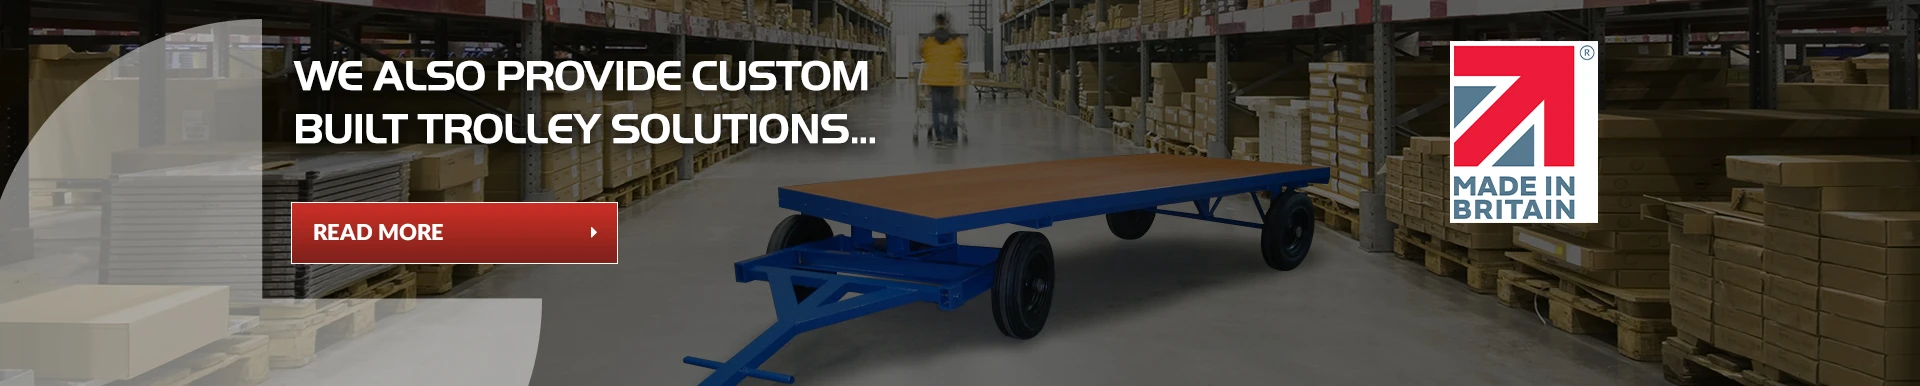 We Can Provide Custom Built Trolley Solutions - View Our Gallery